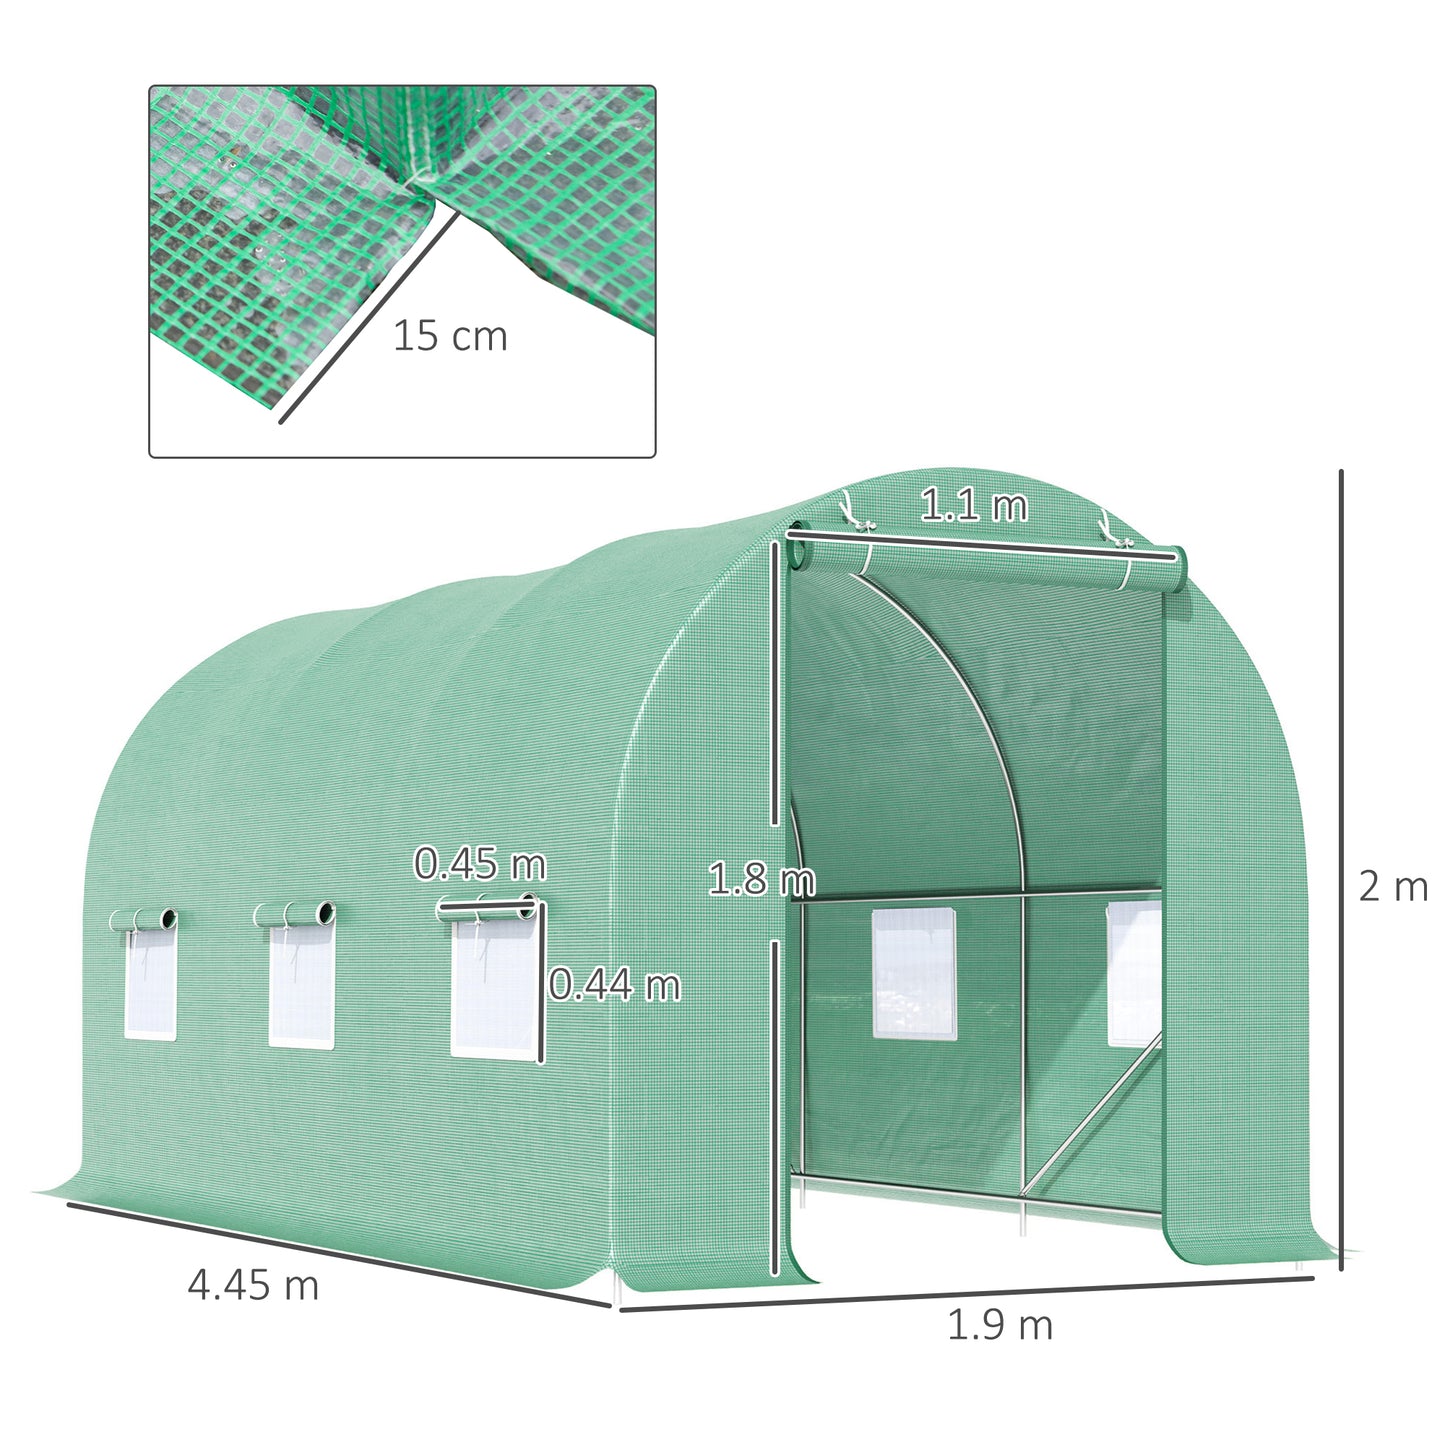 Outsunny Walk-in Greenhouse: Tunnel Design with Door & Ventilation Window, 4.5m x 2m x 2m, Green